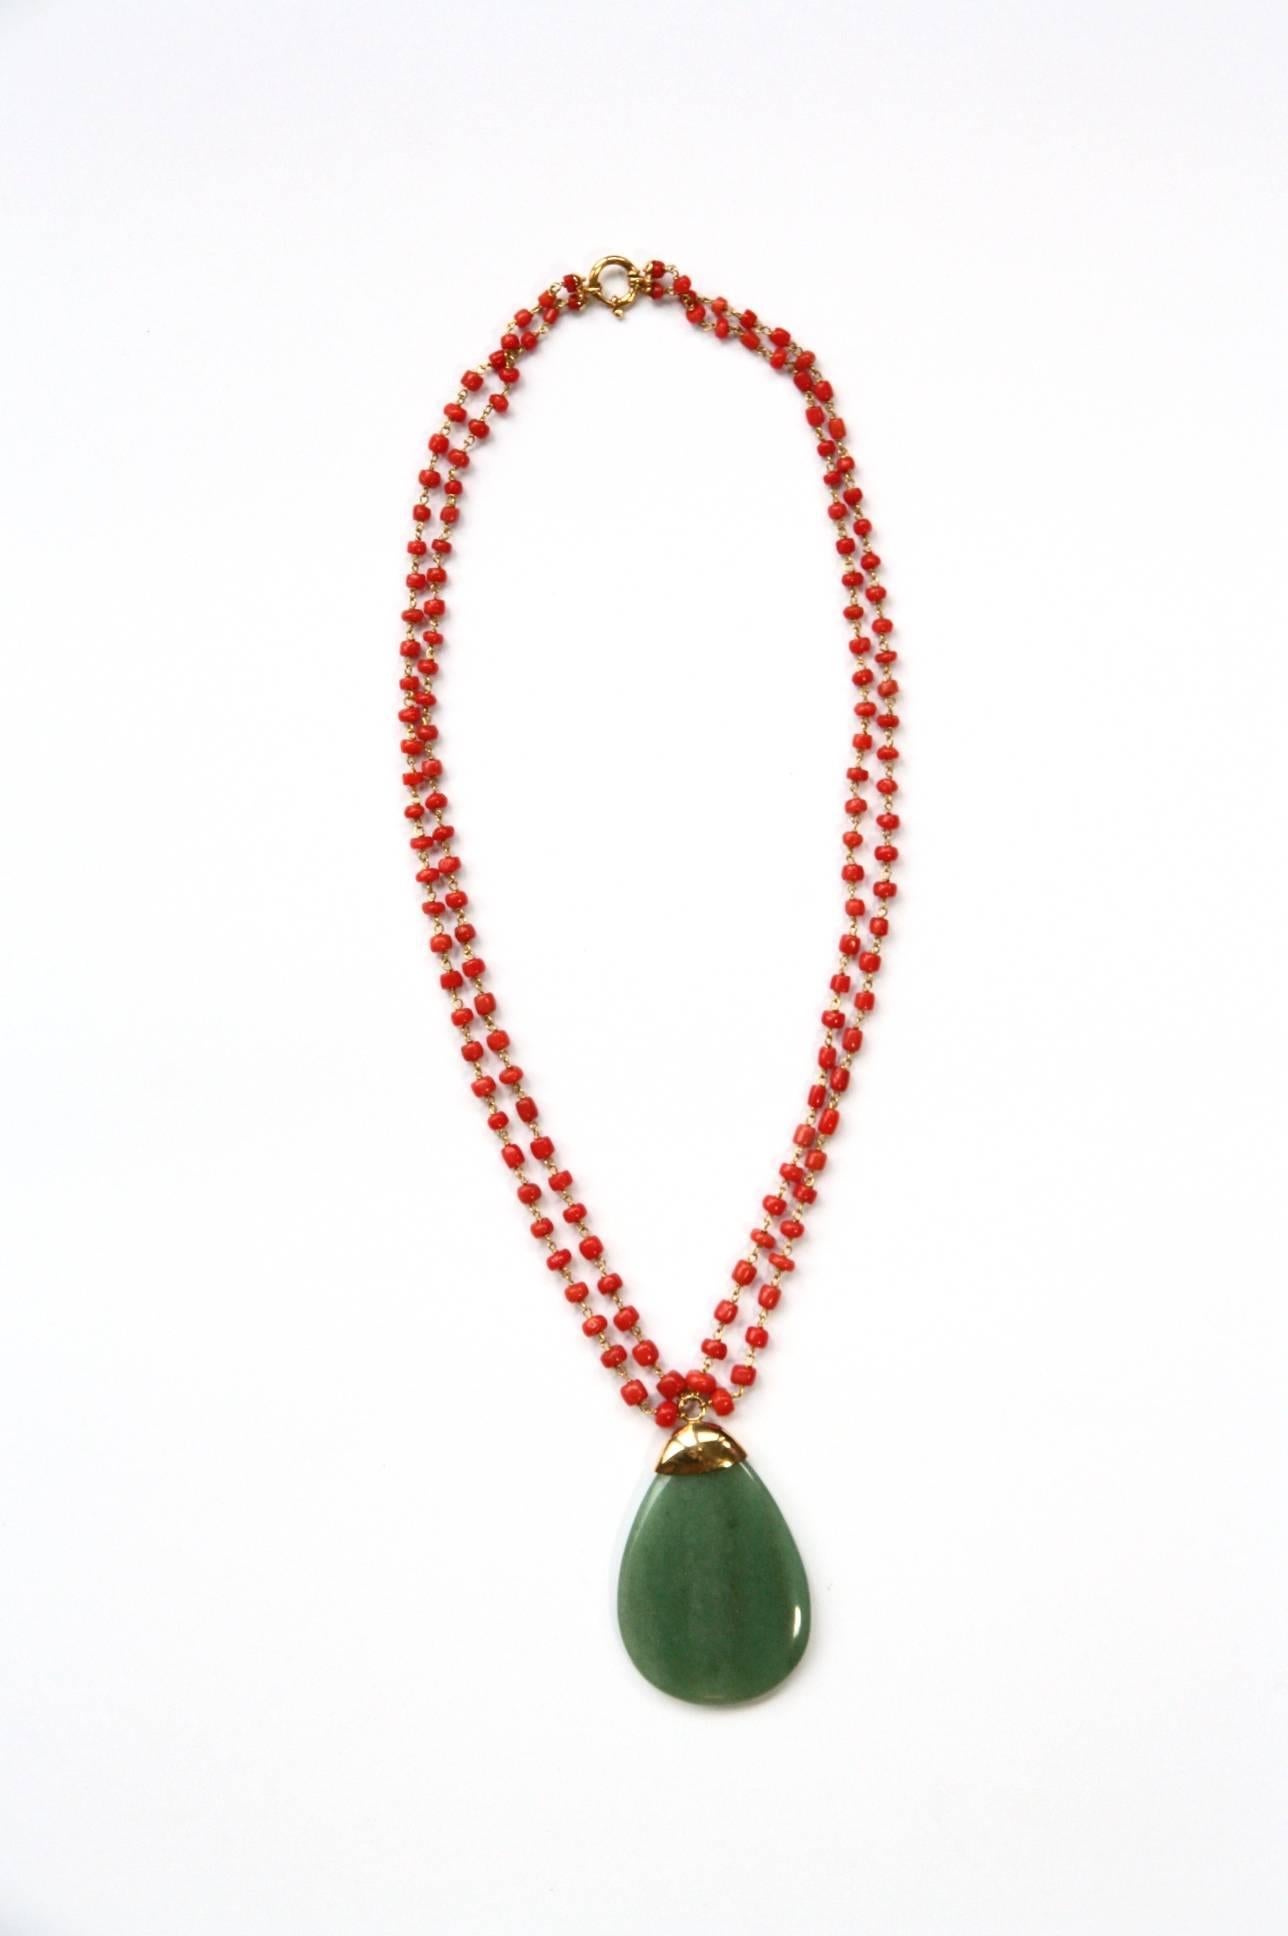 Drop  jade necklace  antiques Sciacca  Iatalian Coral 18kt gold 21,40.
All Giulia Colussi jewelry is new and has never been previously owned or worn. Each item will arrive at your door beautifully gift wrapped in our boxes, put inside an elegant